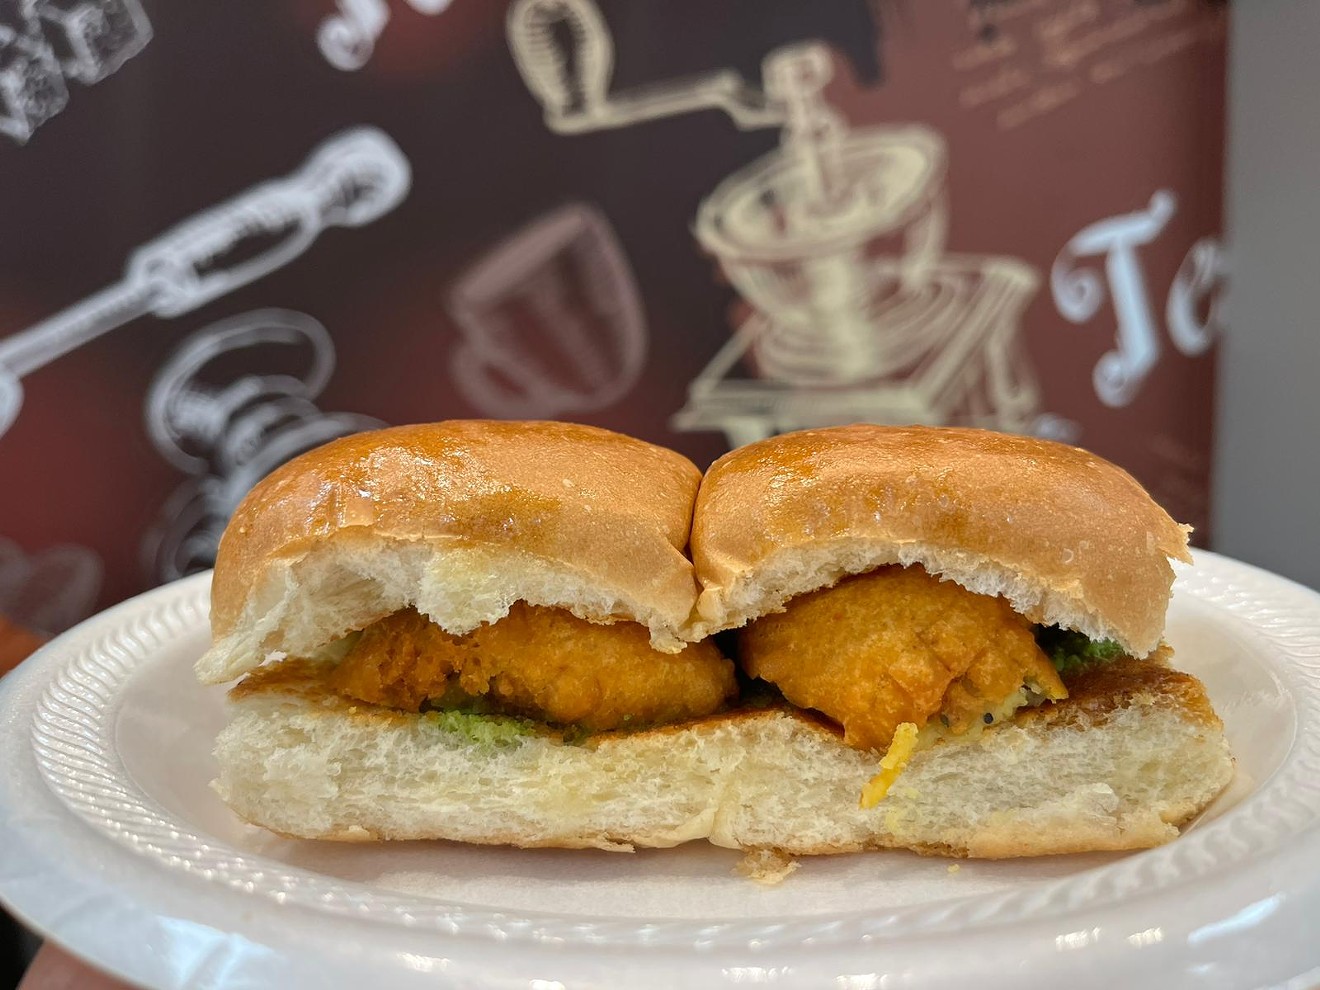 Vada Pav is a classic Indian street sandwich, stuffed with balls of fried potato and spicy chutney.